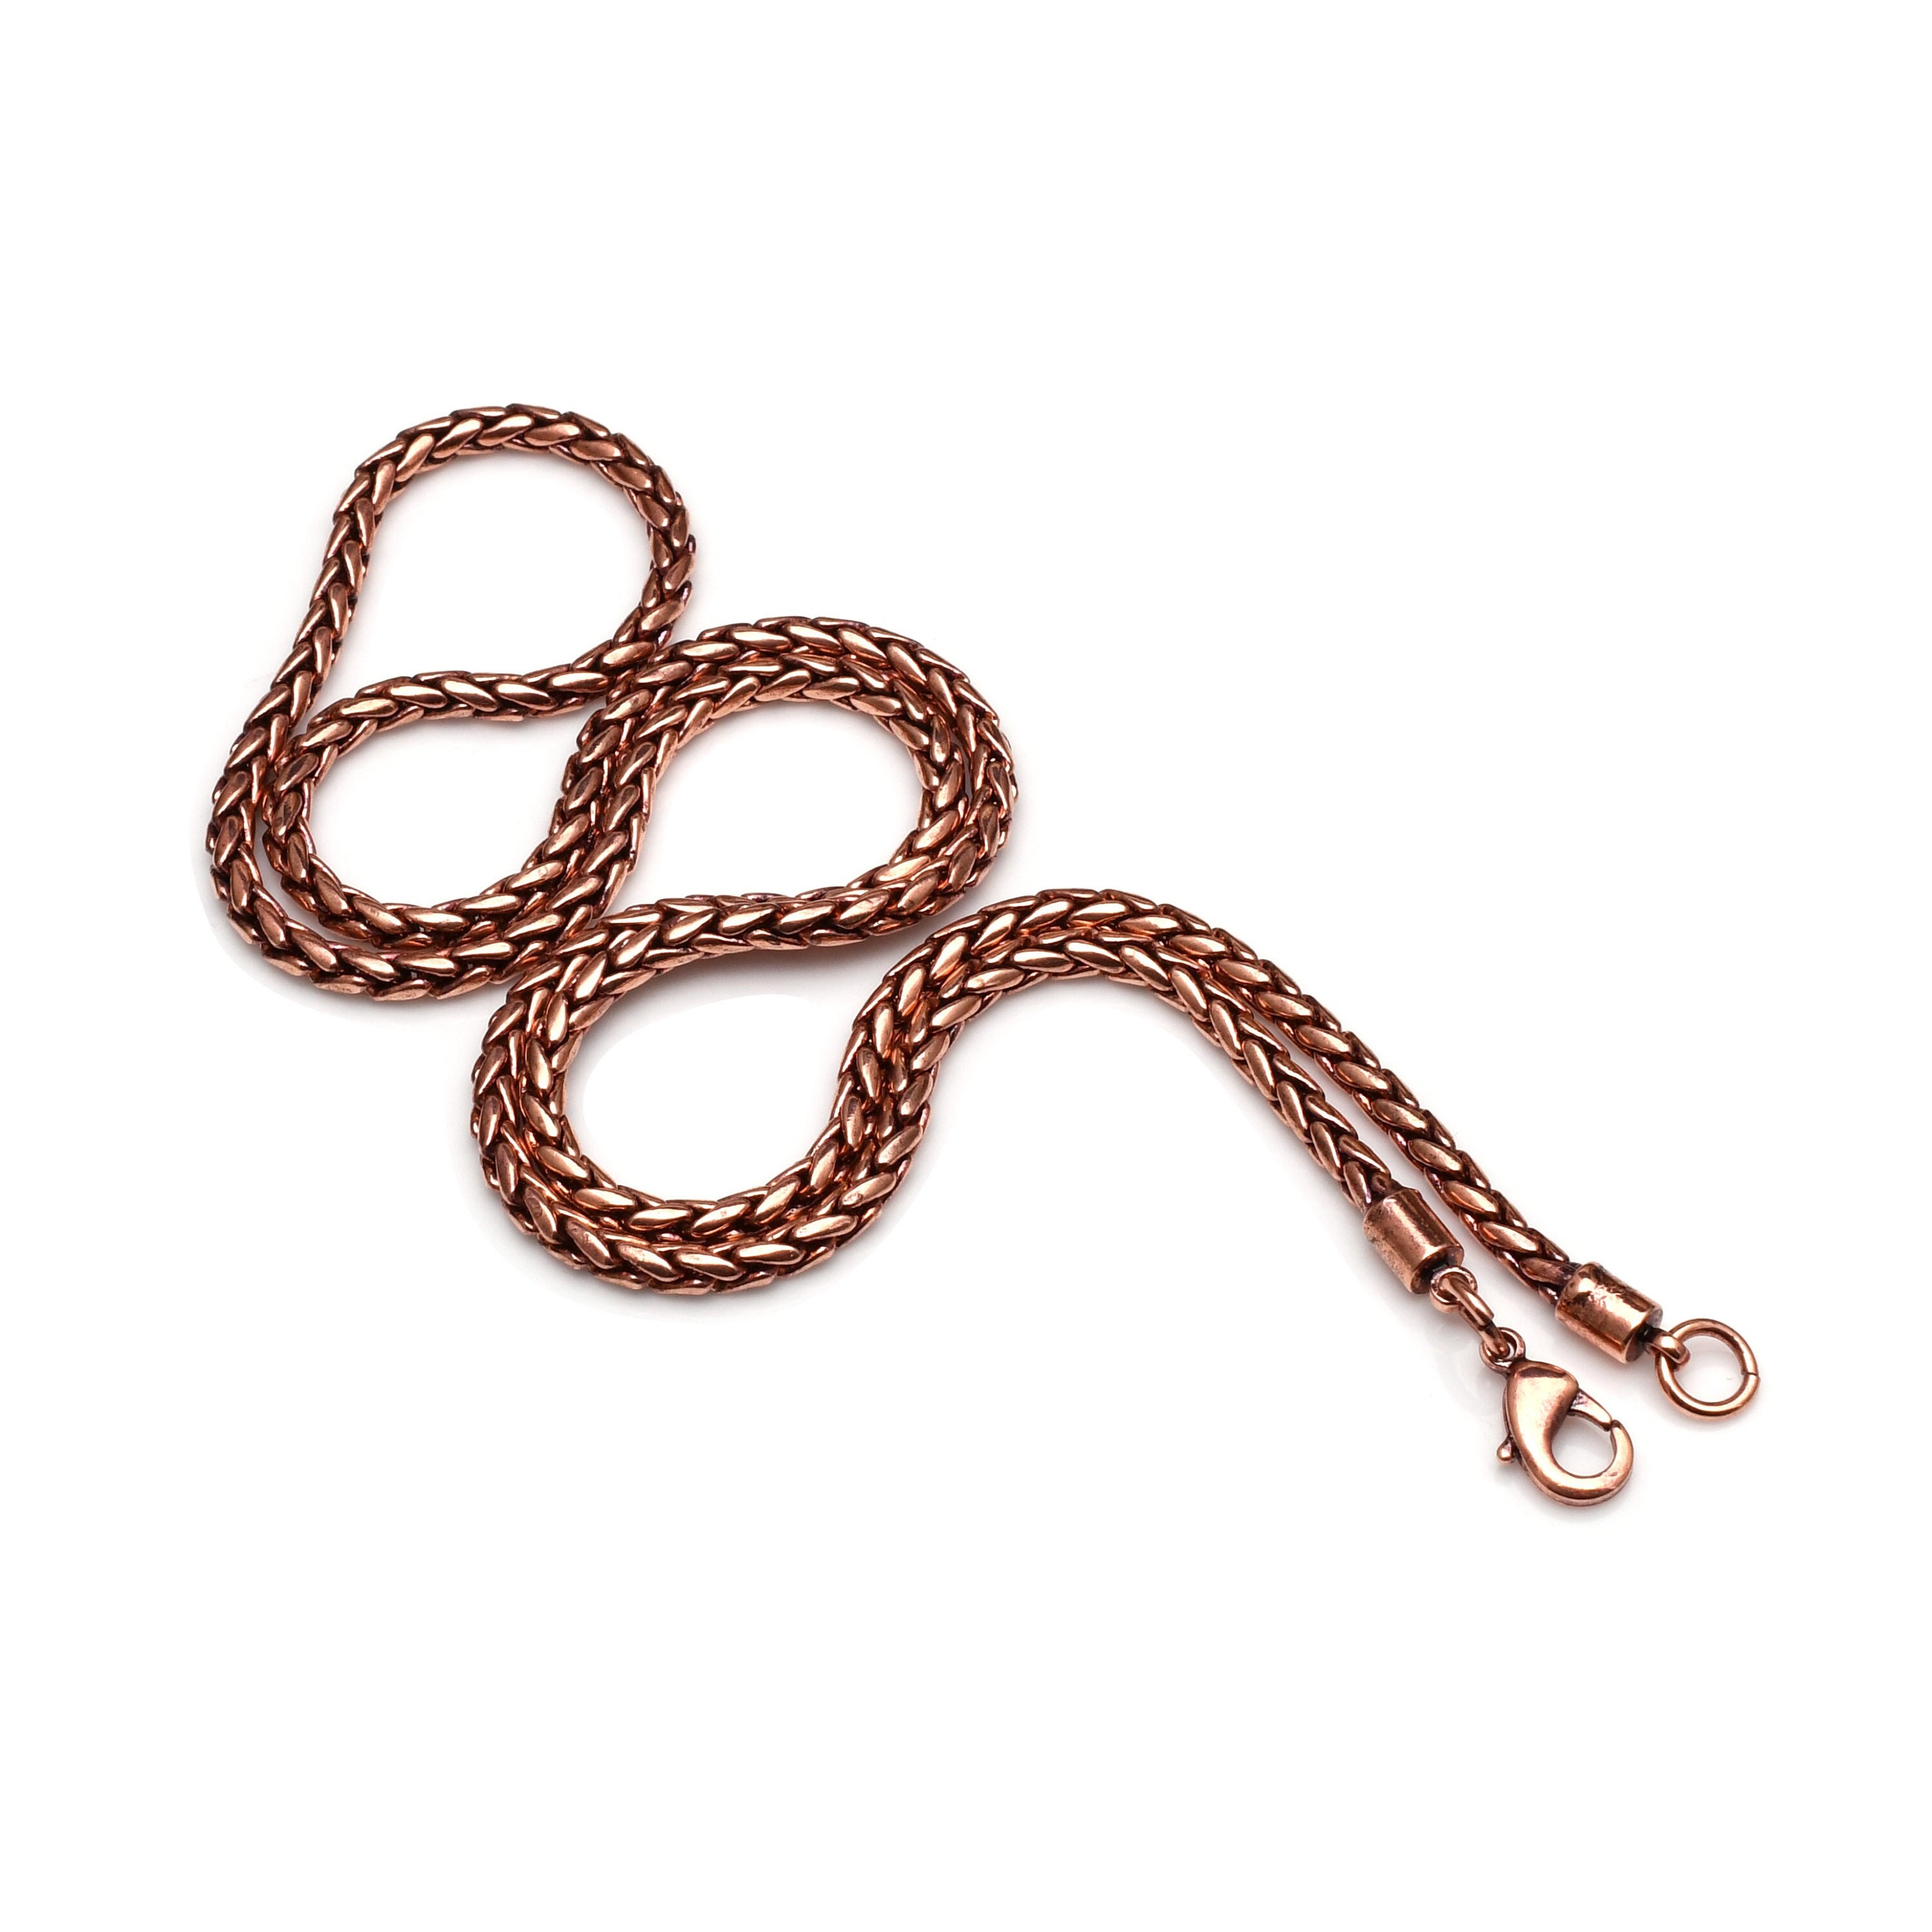 100% Solid Copper Rope Chain Pure Copper Oxidized Rope Chain Necklace Handmade Copper Chain Necklaces for Women and Mens Chain Thickness 3mm